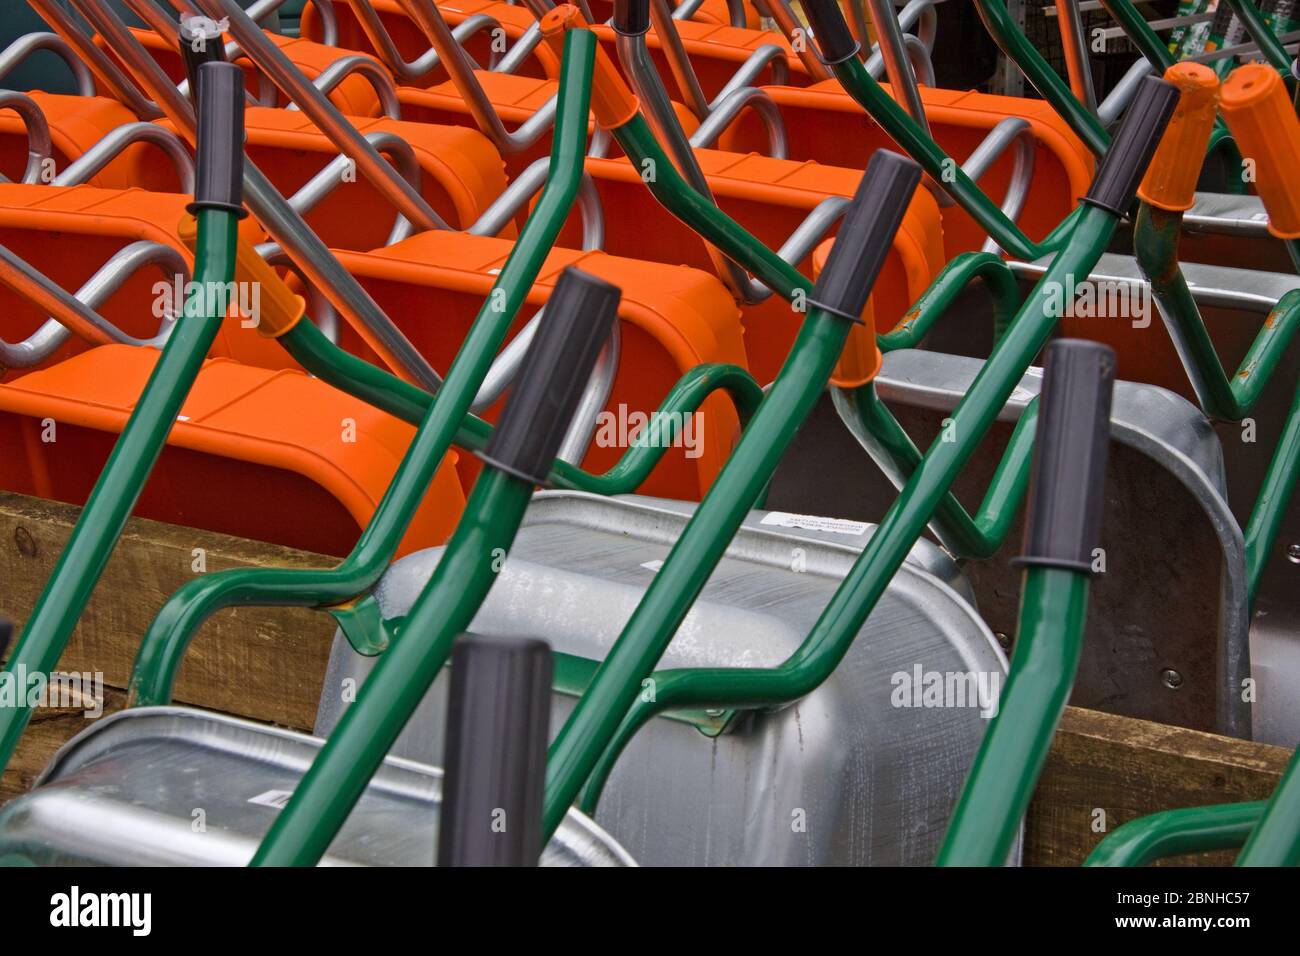 Wheelbarrows fresh from the production line stacked ready for the retail market Stock Photo